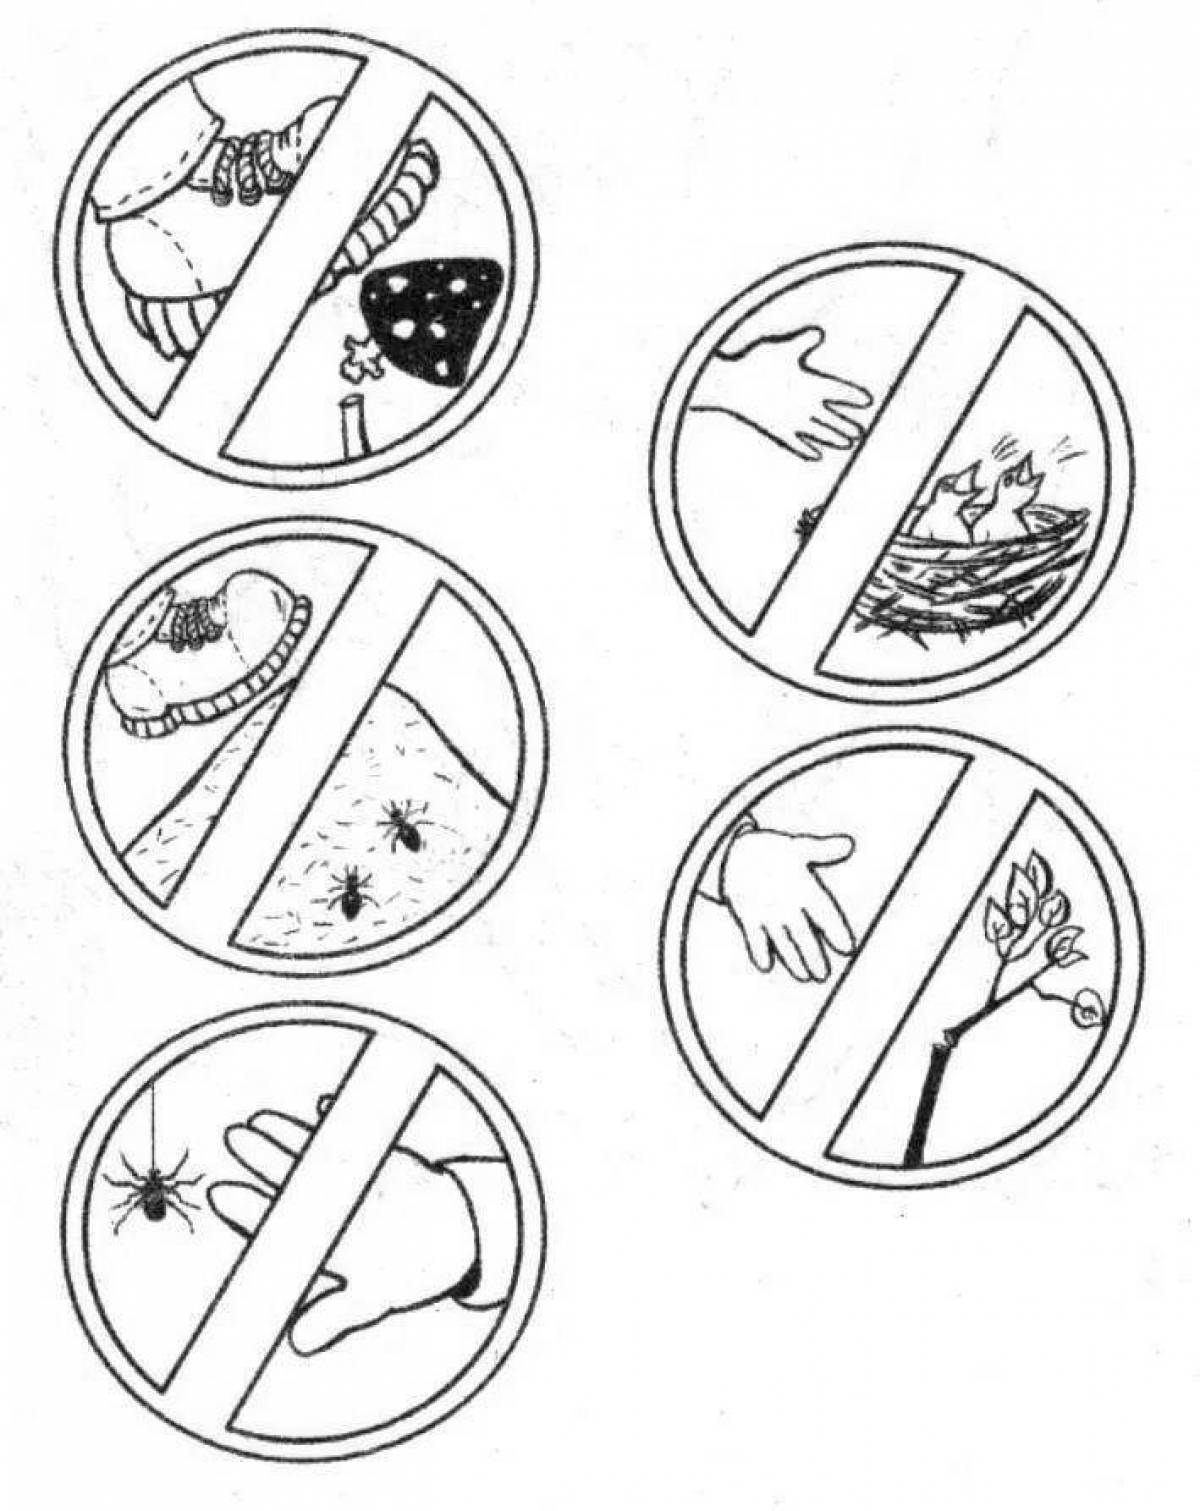 Coloring book harmonious signs of the environment